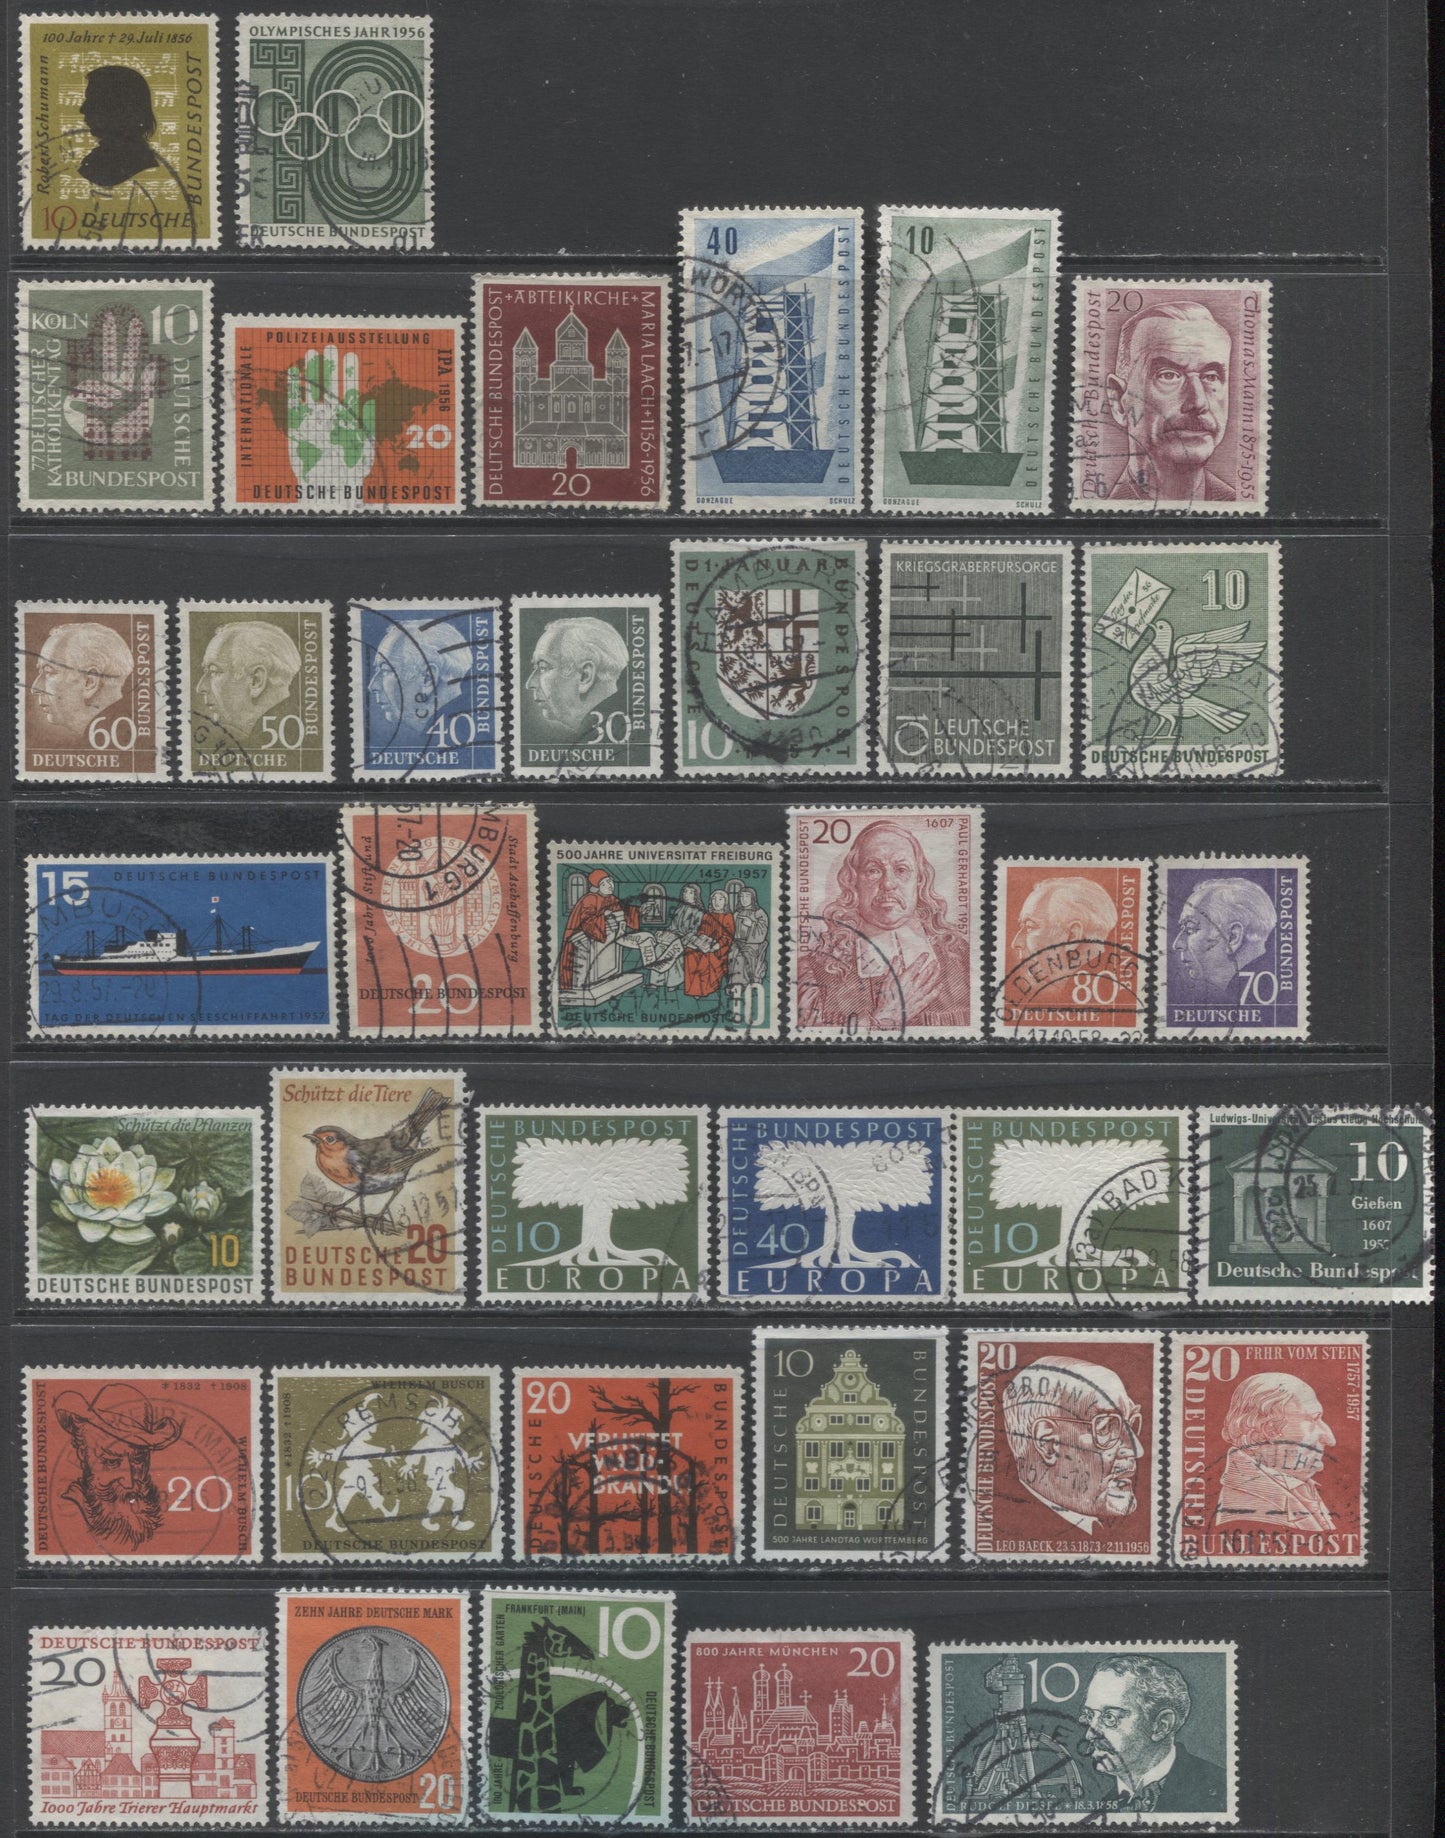 Lot 121 Germany SC#742/787 1956-1958 Commemoratives, 38 Fine/Very Fine Used Singles, Click on Listing to See ALL Pictures, 2017 Scott Cat. $39.2 USD